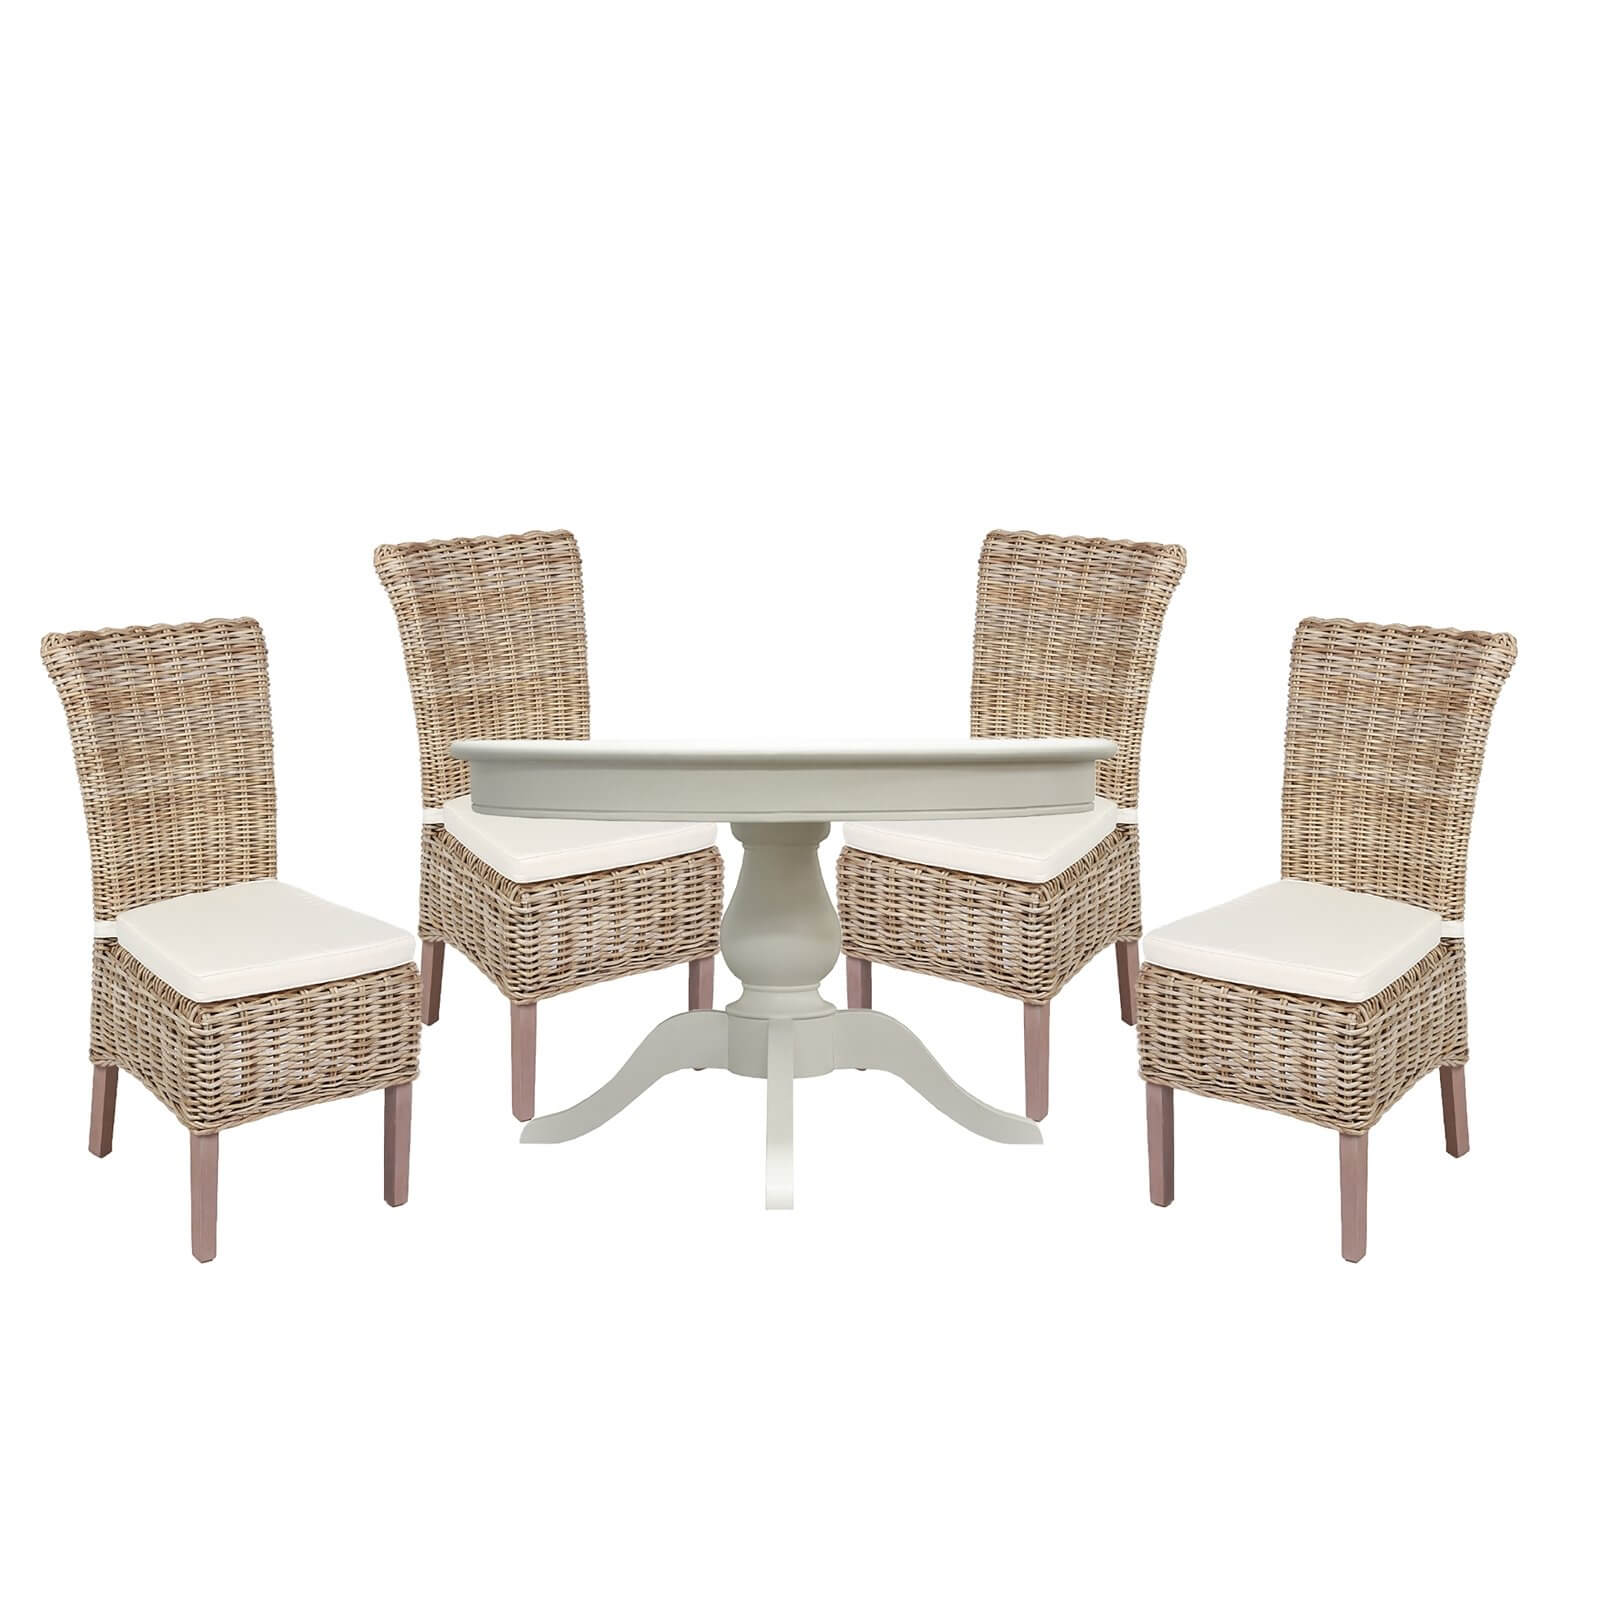 Holywell 4 Seater Dining Set - Antique White & Wicker